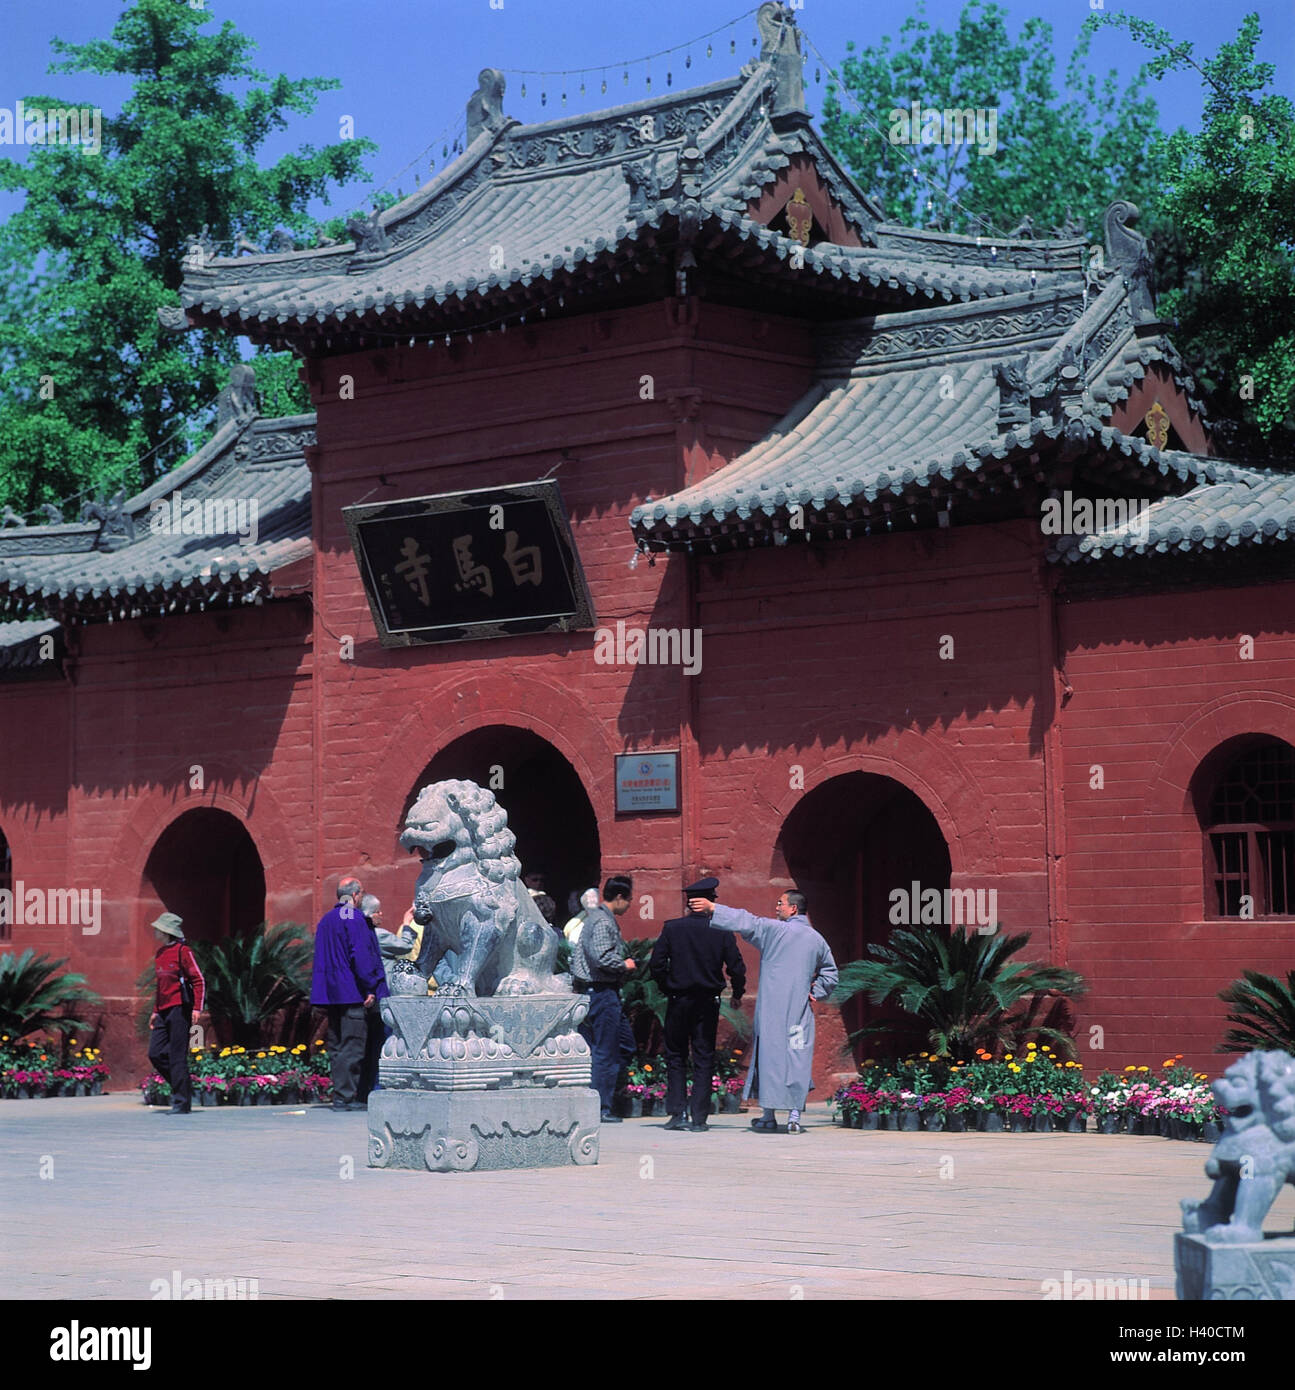 China, Henan, Luoyang, Baima si temple, visitor, Lojang, Loyang, cloister the white horses, place of interest, structure, architecture, facade, red, tourists, tourism, sightseeing Stock Photo